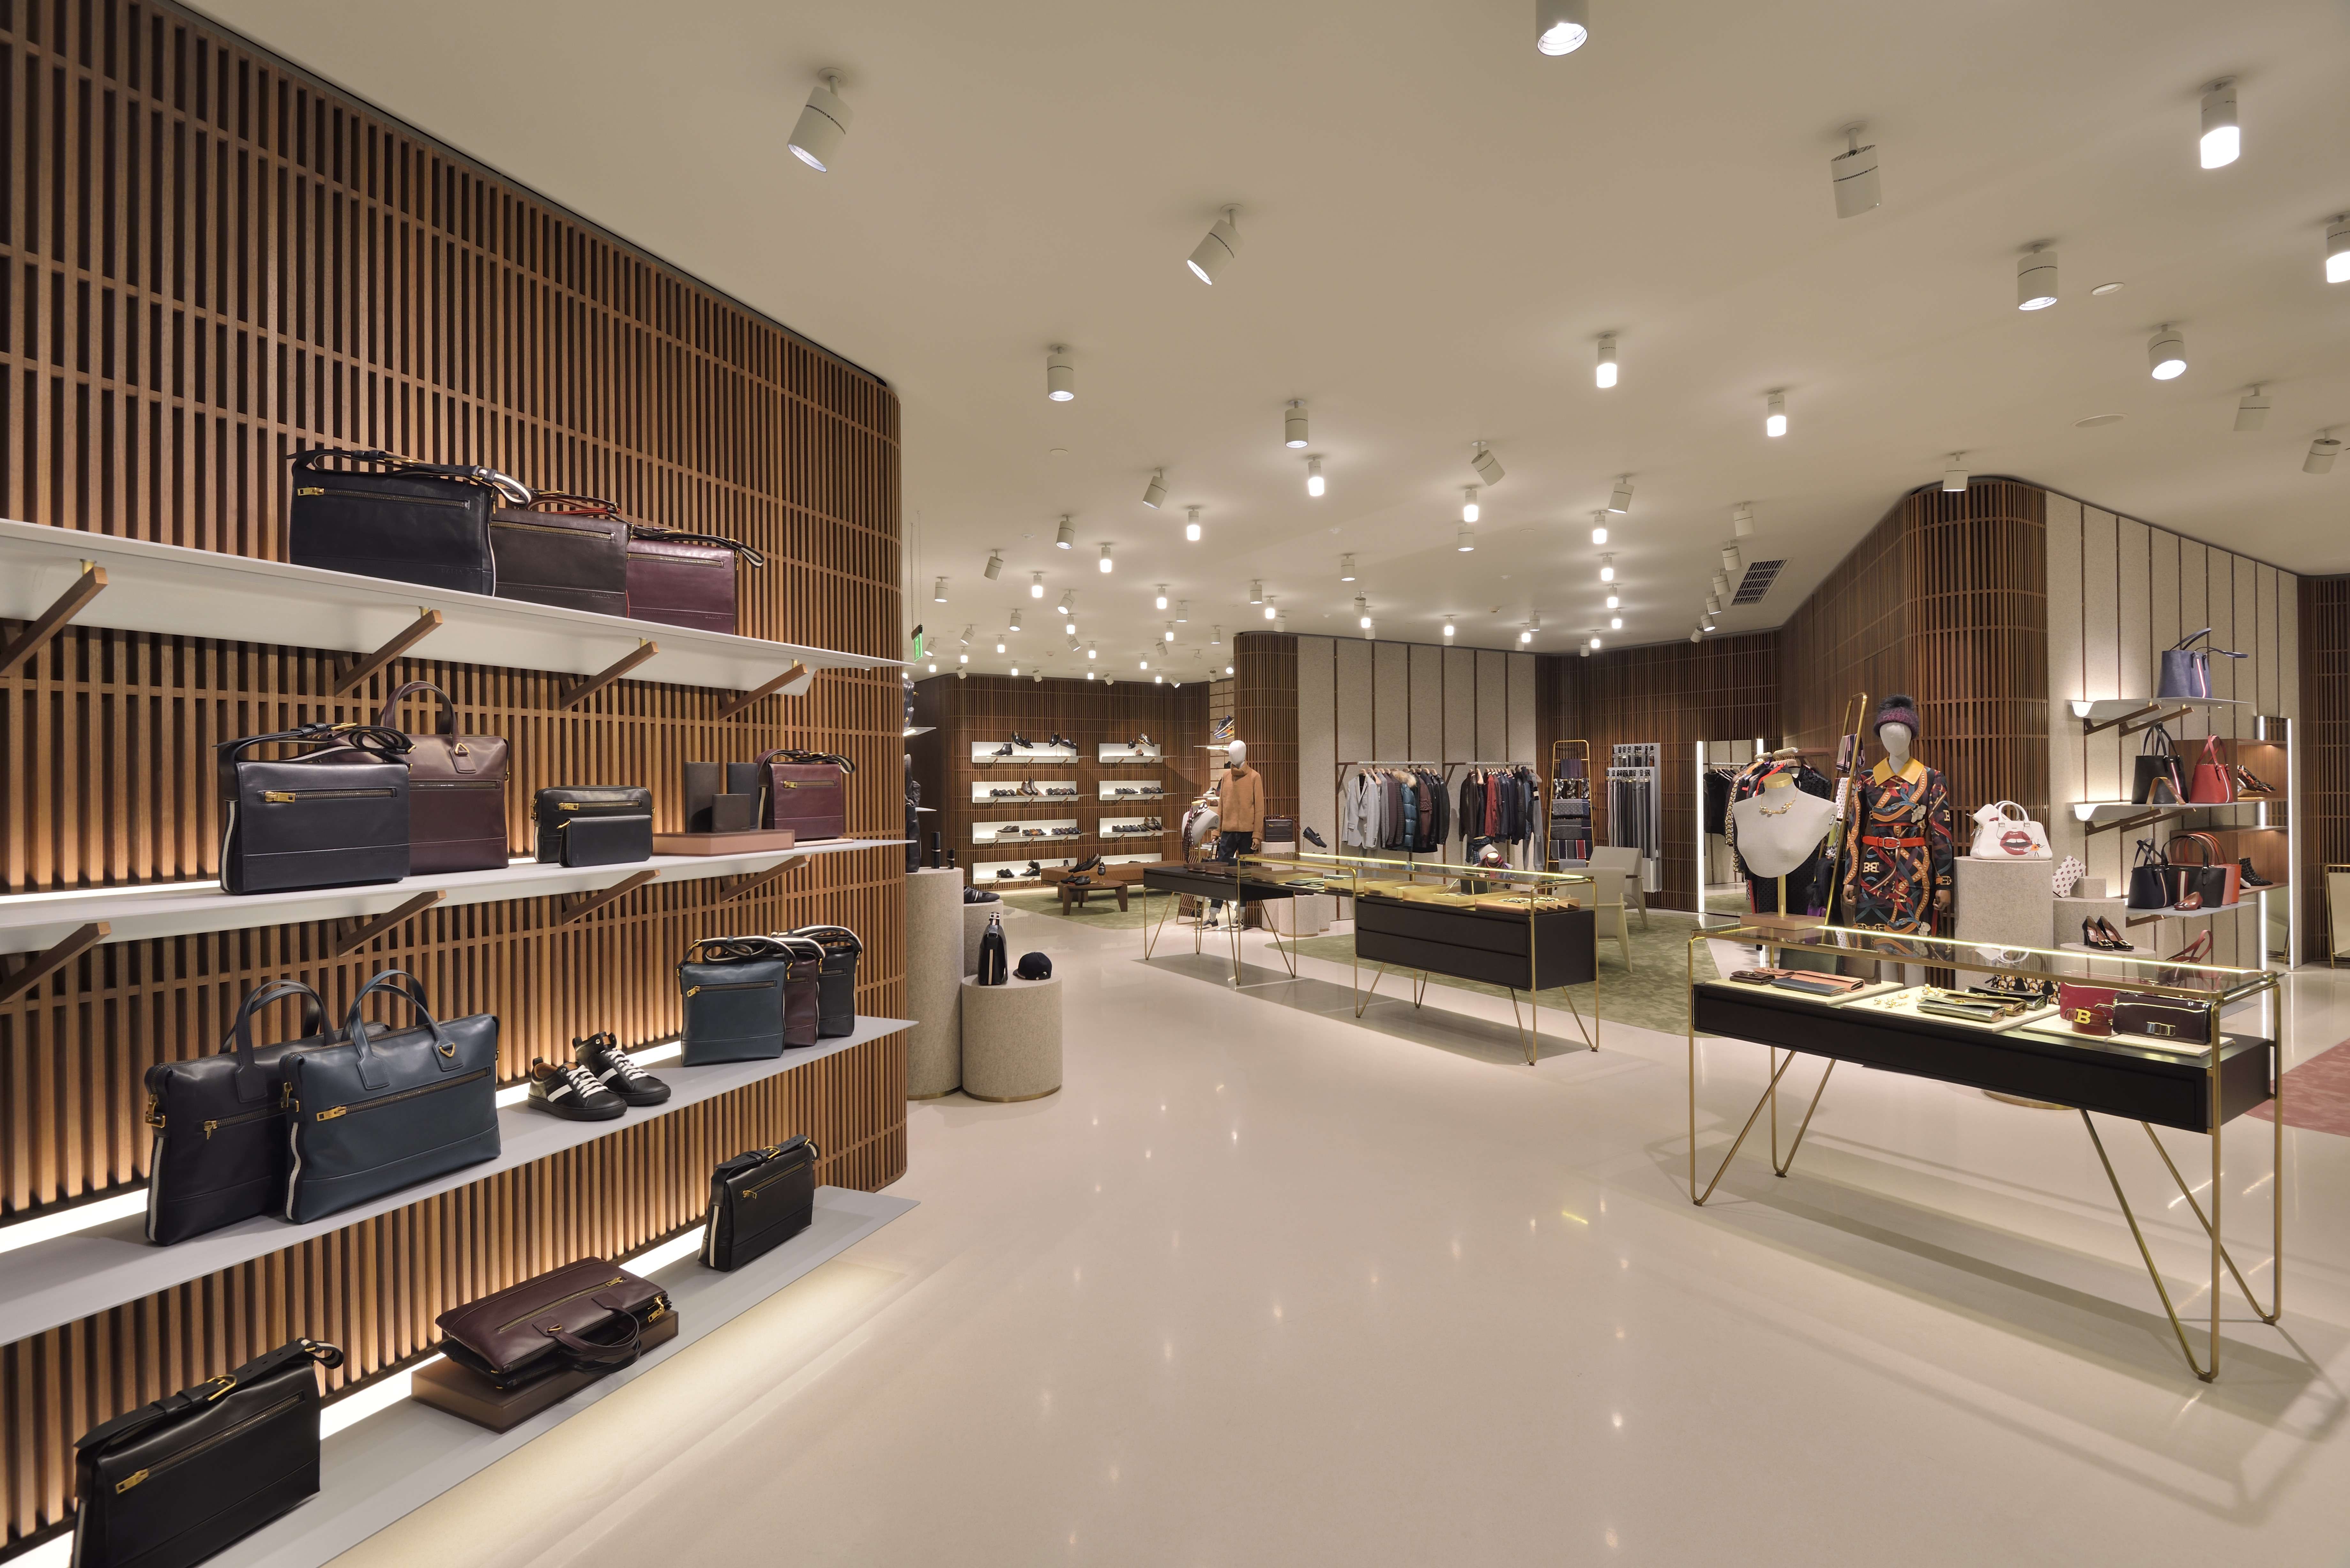 Gucci, Louis Vuitton to expand in India with new outlets in Reliance's  luxury mall - India Today